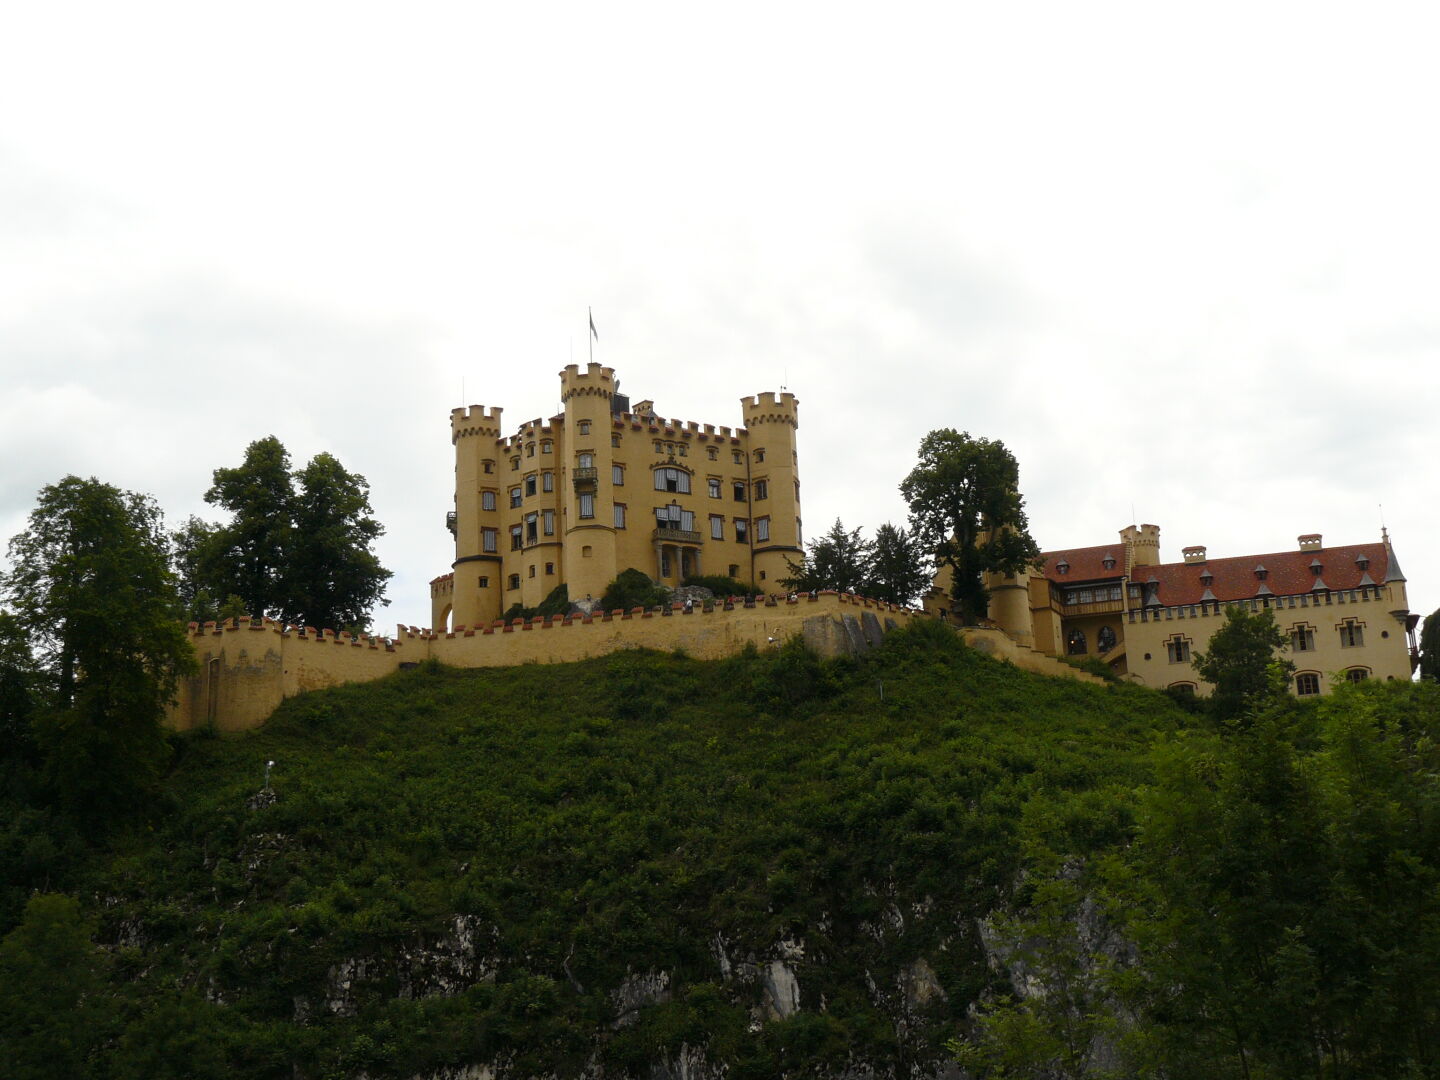 Castle Hohenschwangau, built by the father of Ludwig II, King Maximilian II. He&rsquo;s the guy whom the trail is named after.